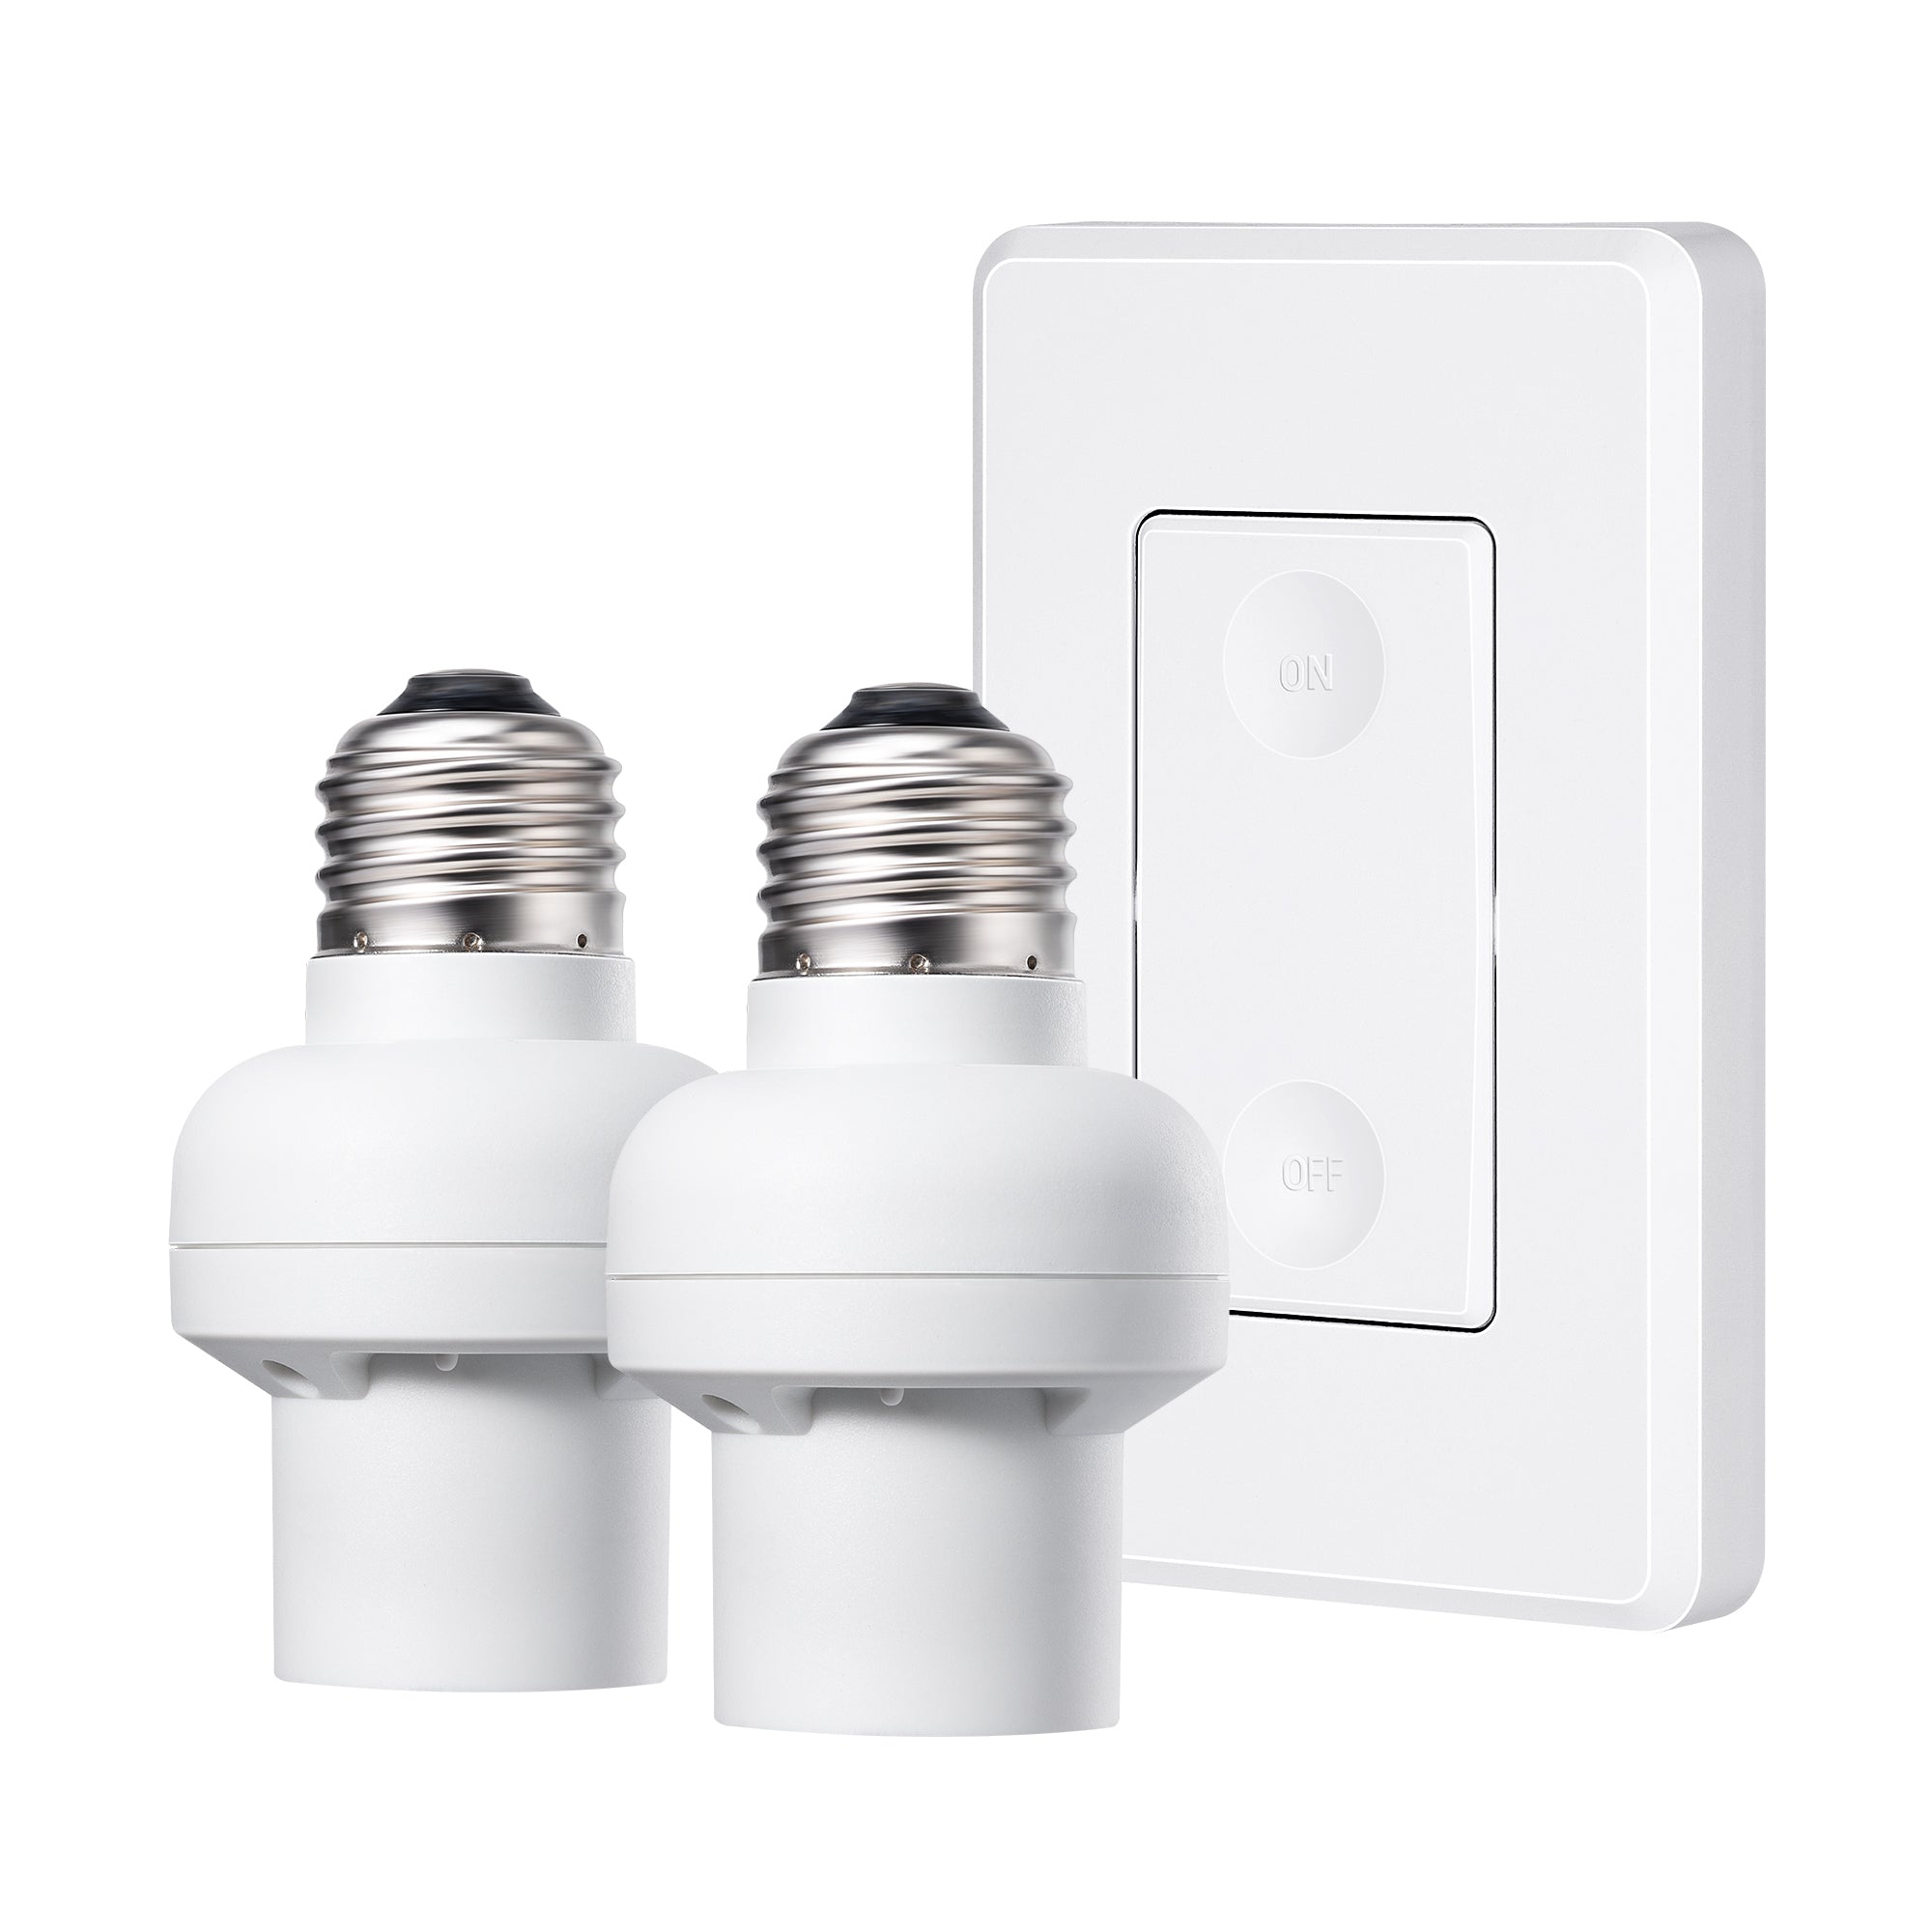 Wireless Light Switch Receiver for Remote Lamp LED Ceiling Bulb